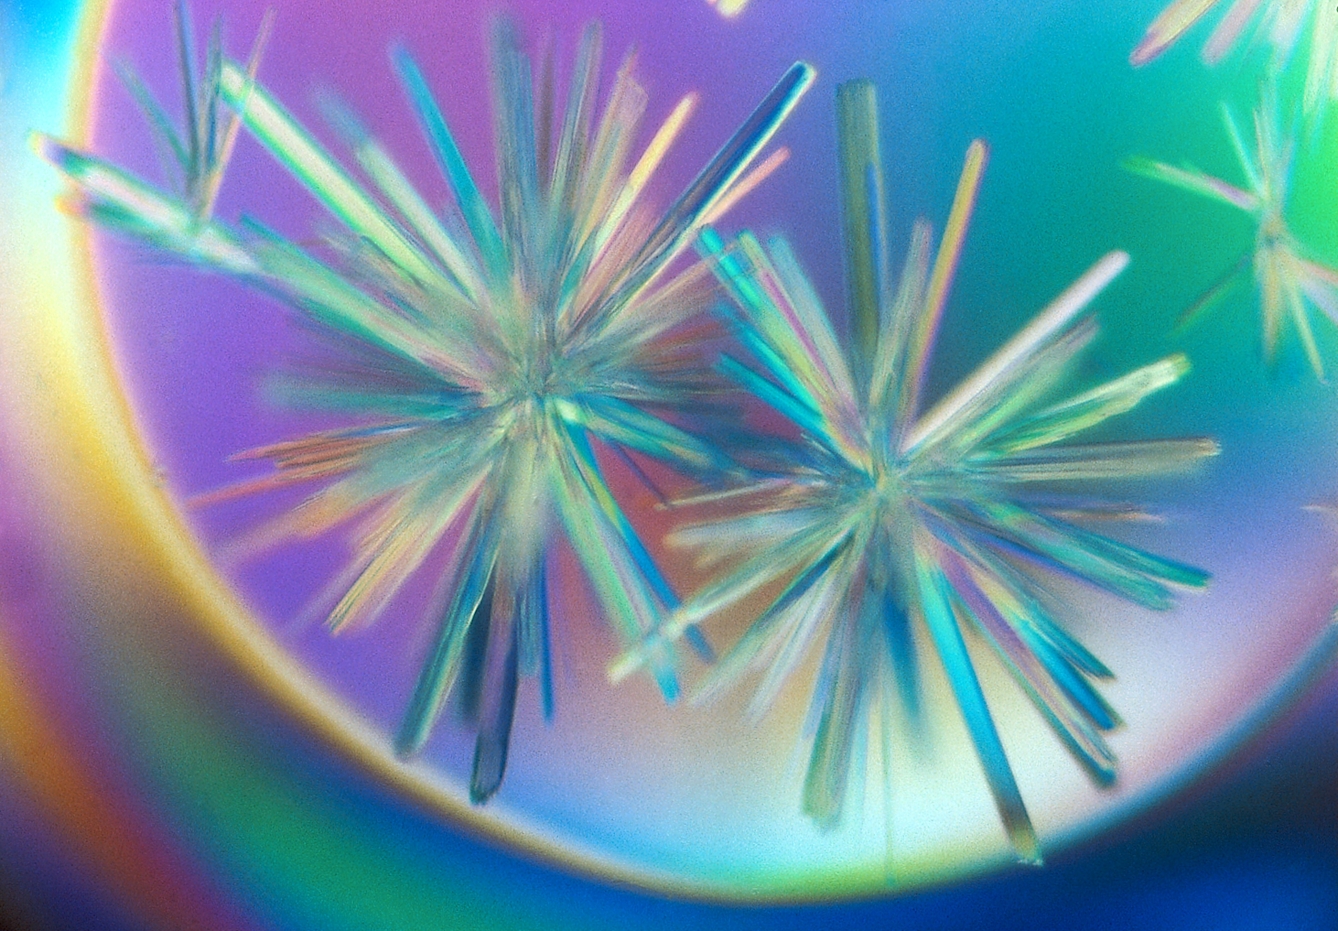 An image generated by a process called X-ray crystallography, the image shows a spiked crystalline formation which appears backlit with multicoloured light.